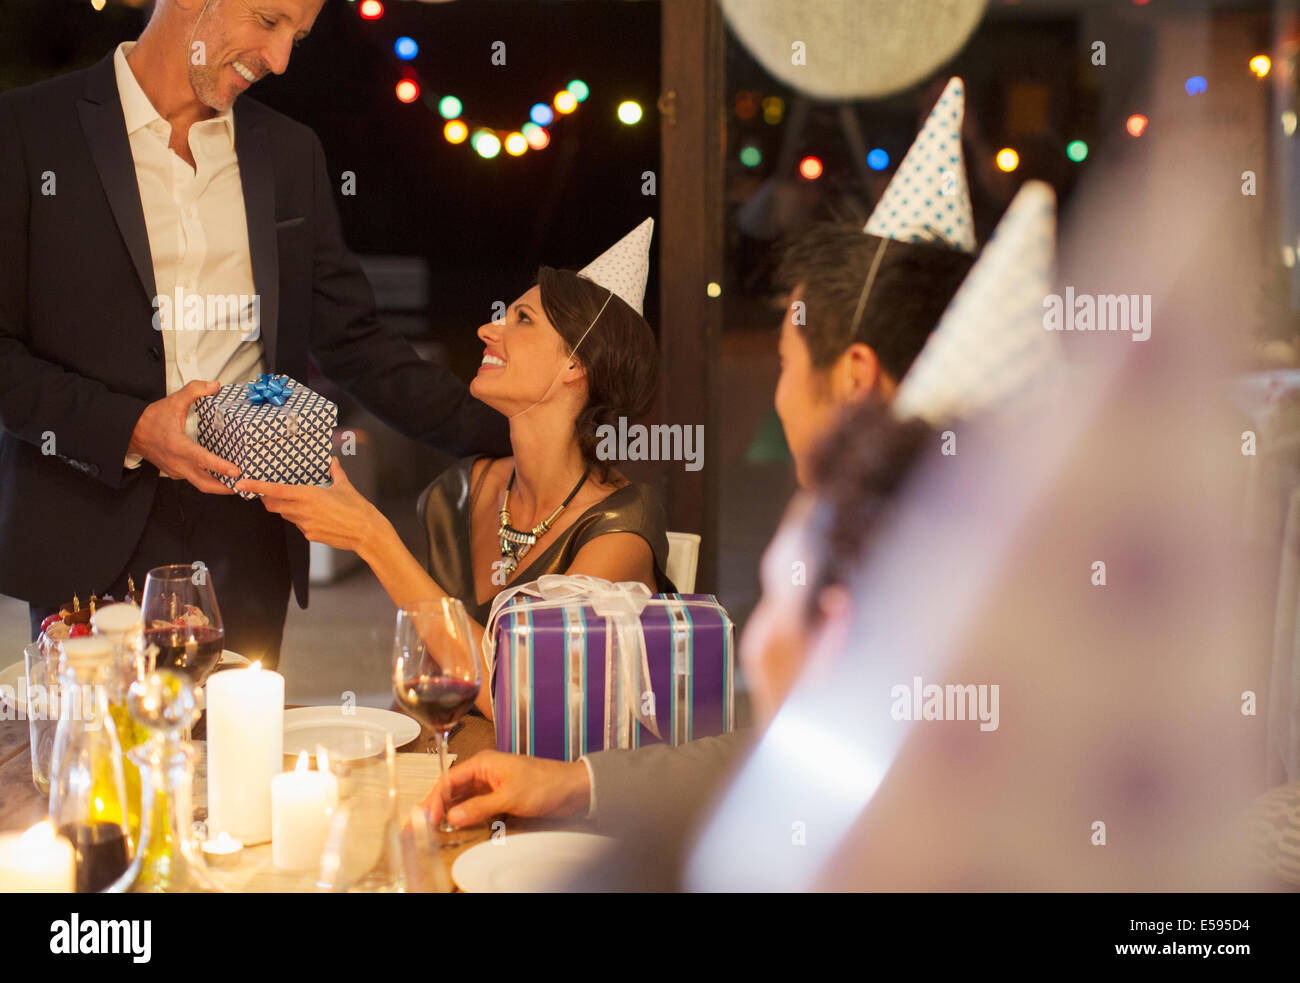 Man giving present at Birthday party Banque D'Images